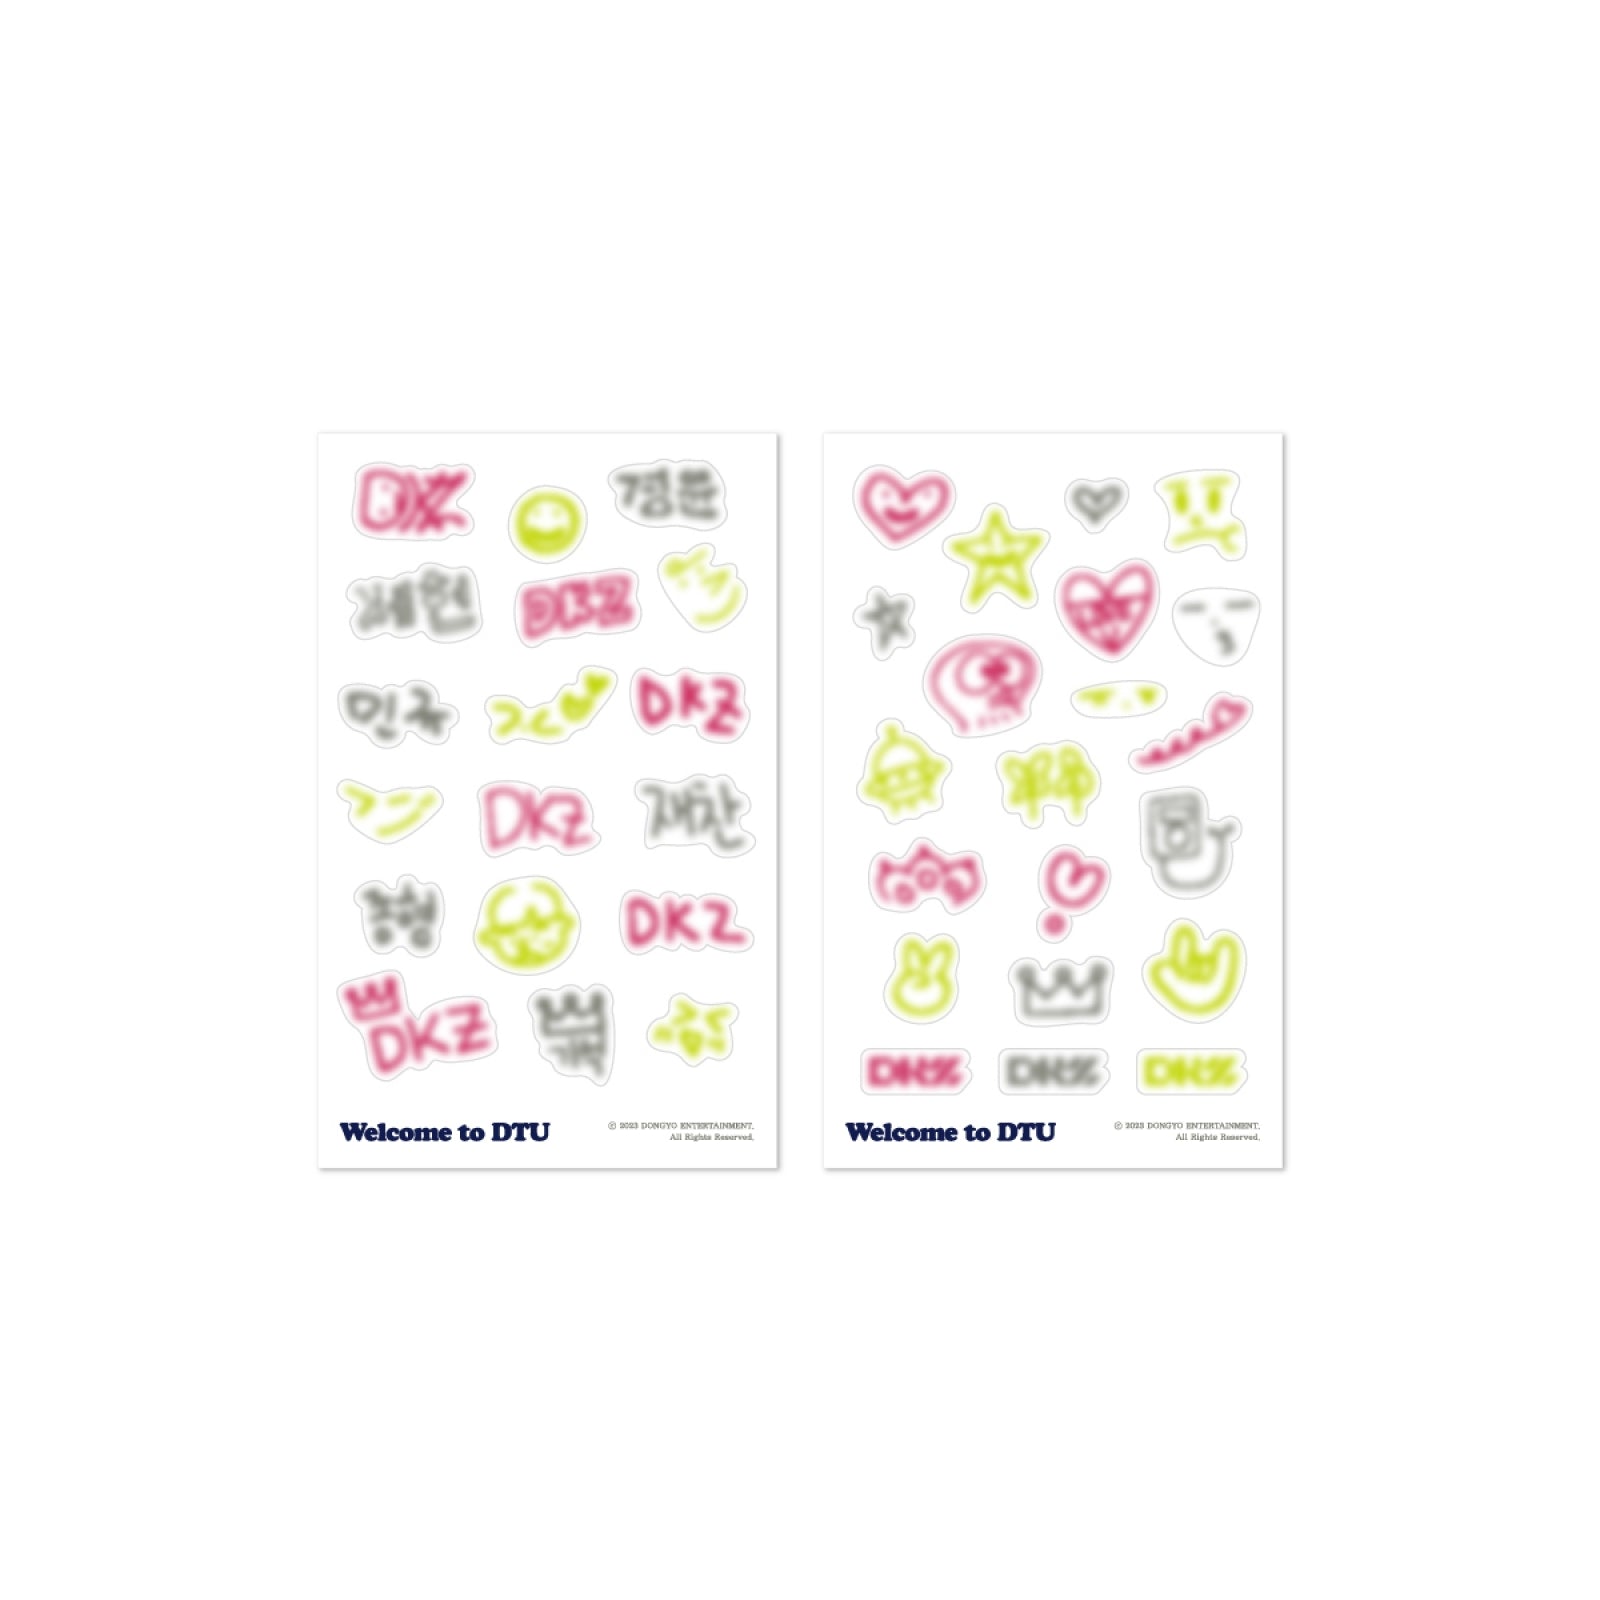 DKZ 2023 FAN CON [WELCOME TO DTU] OFFICIAL MD - 02. LIGHT RING DECO STICKER SET